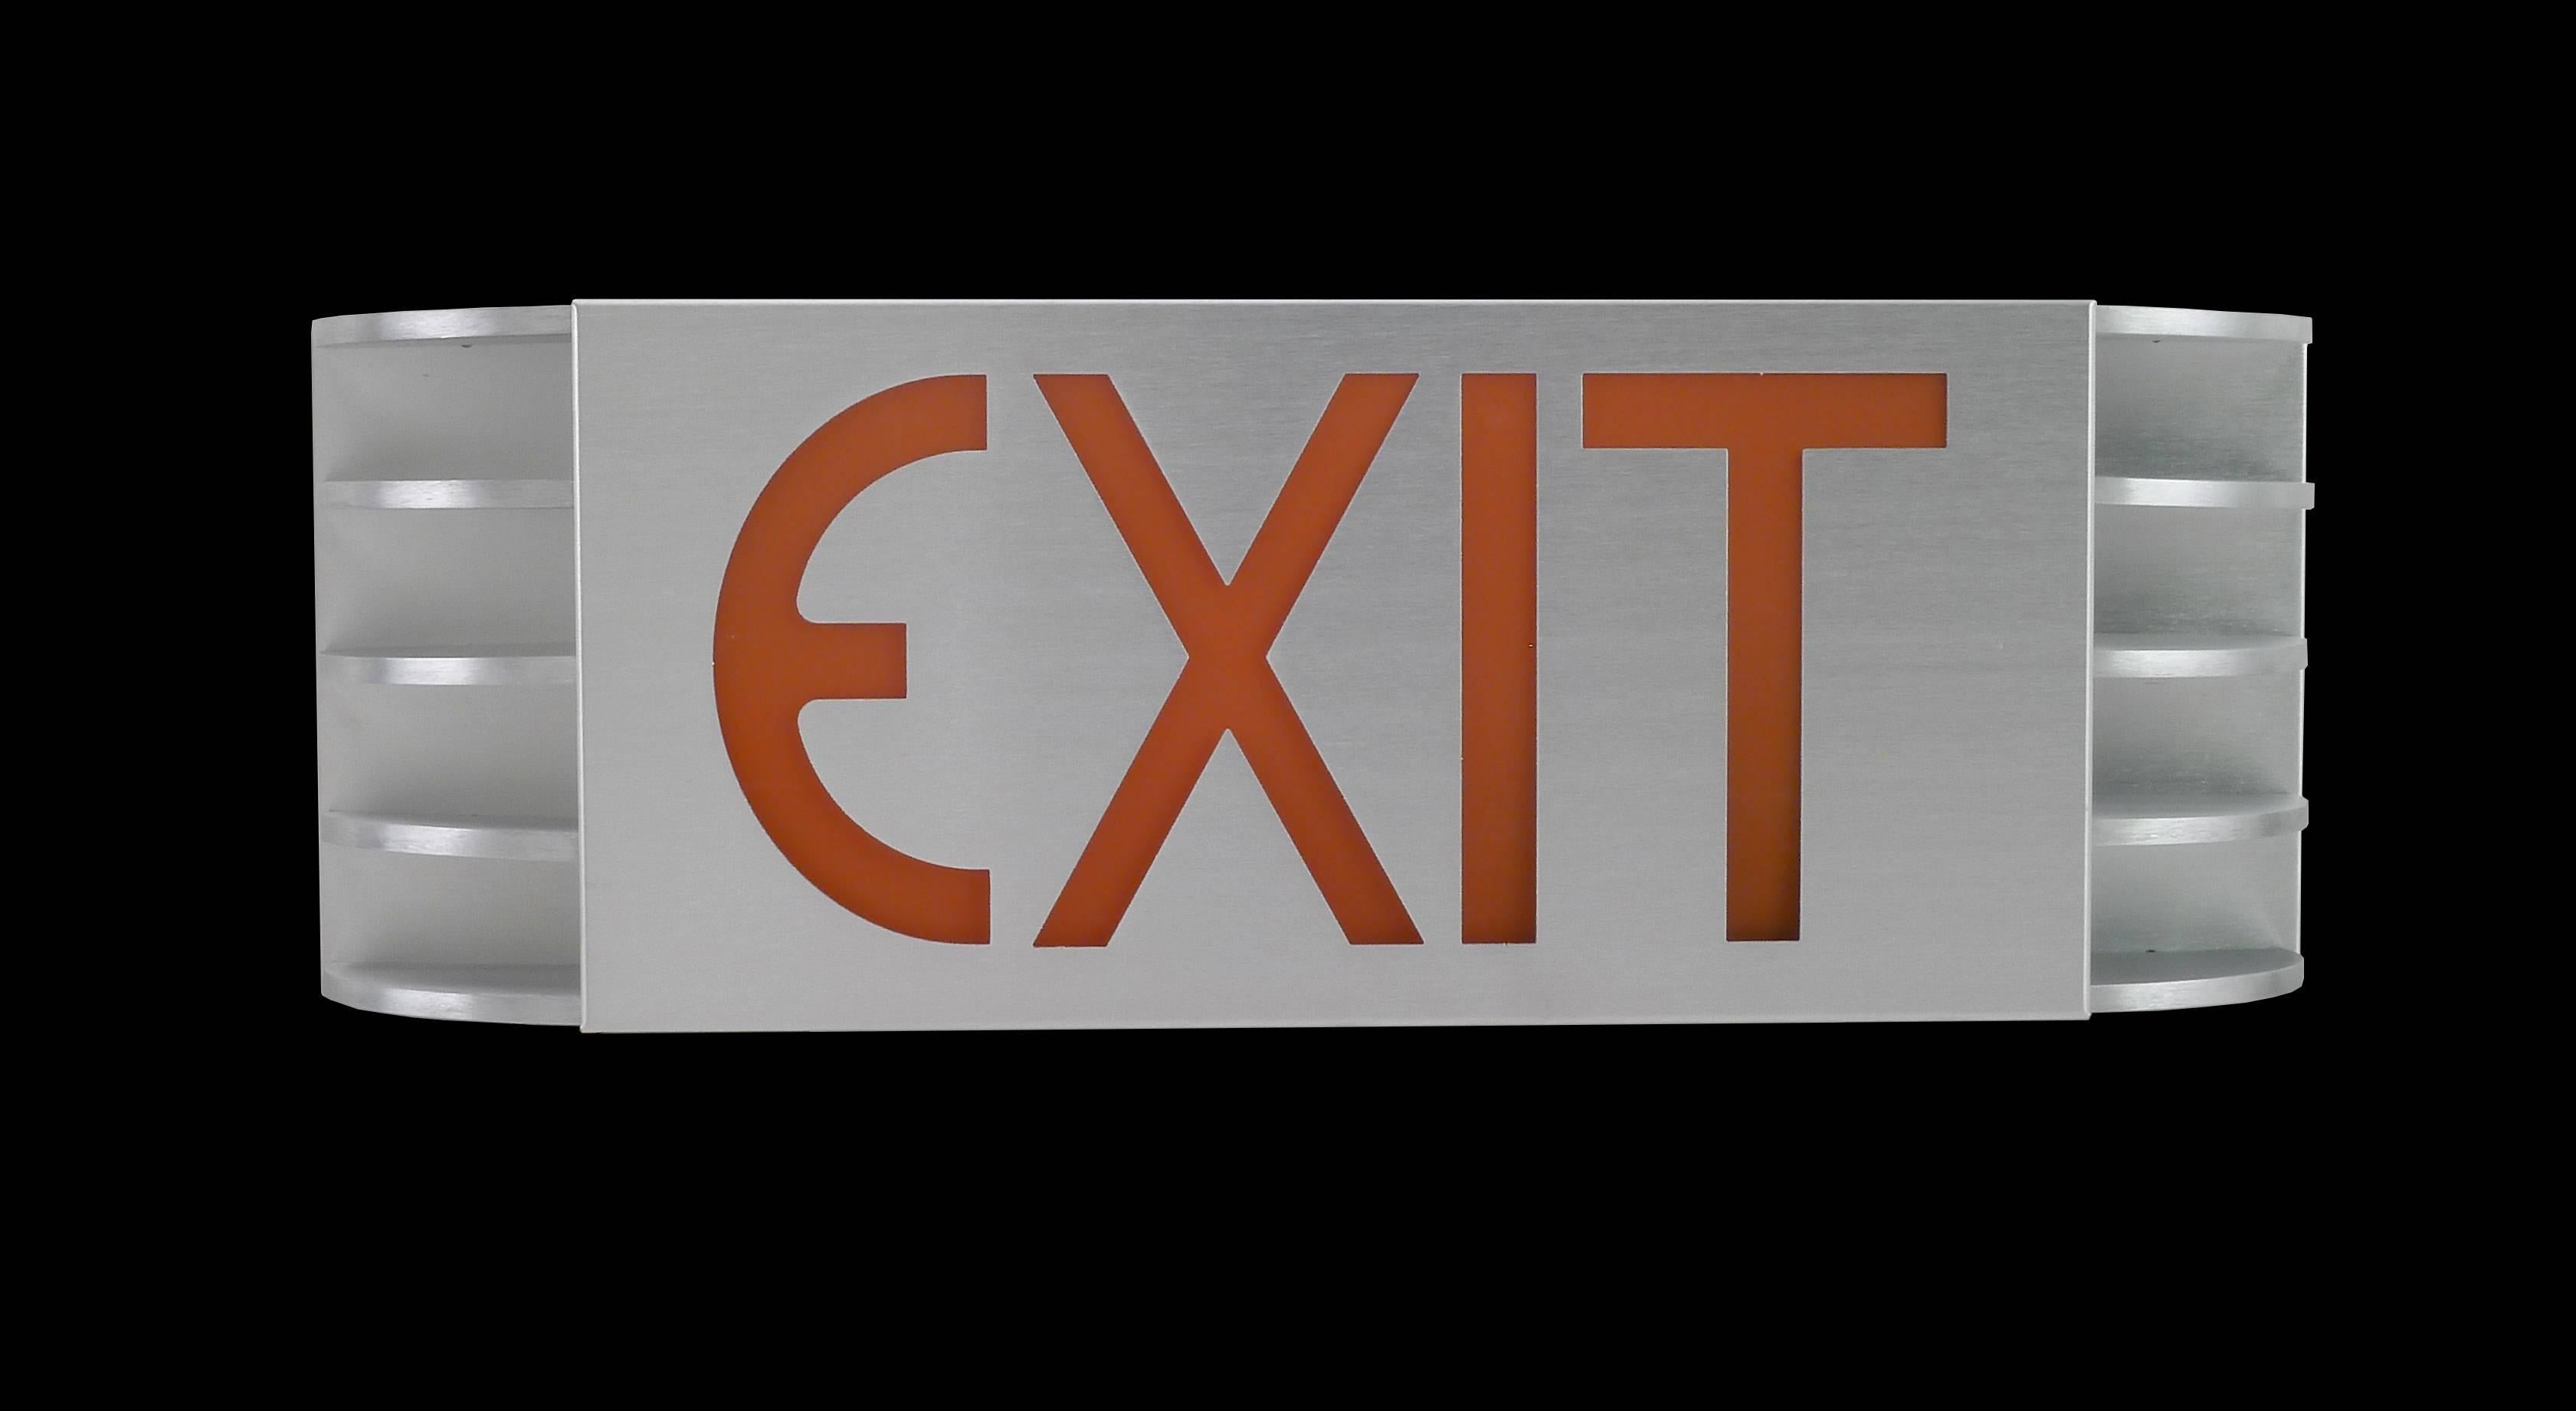 Satin aluminium Art Deco style exit sign. Inspired by an original 1930s Art Deco sign. Please note this was made to replicate a period 1930's exit sign and is not to current codes for exit signs. LED illuminated.

Architect, Sandy Littman of